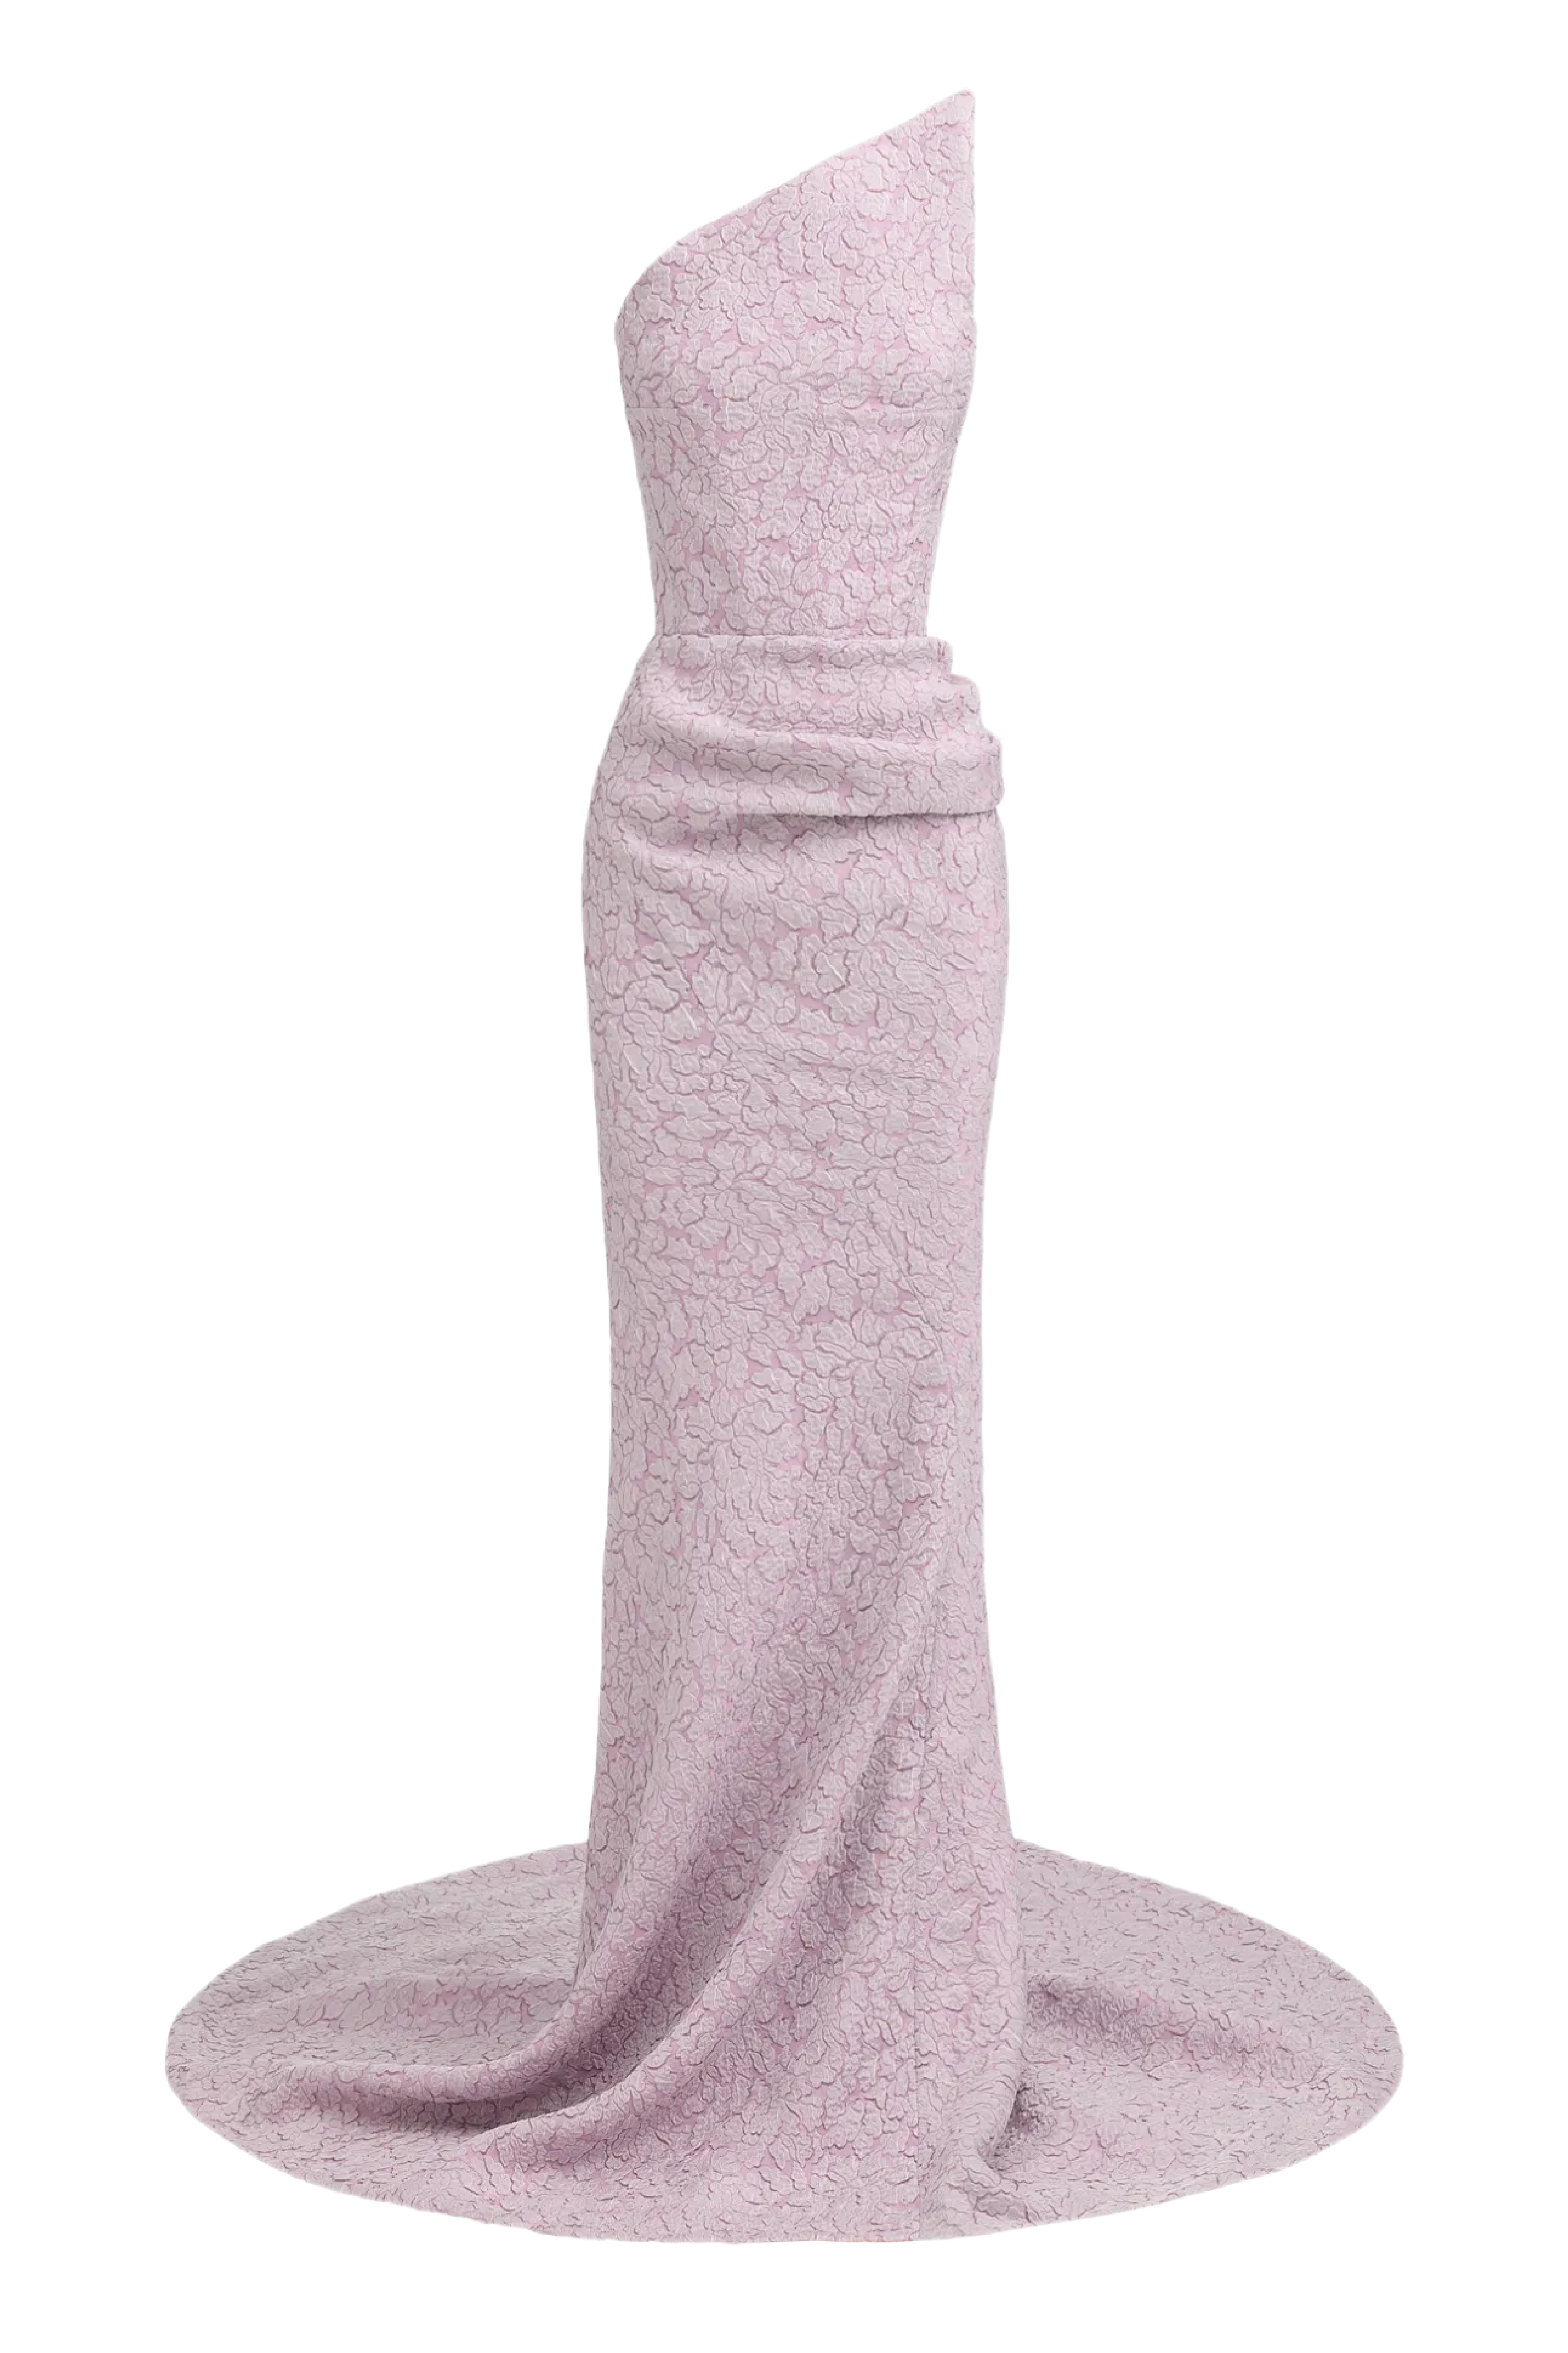 Dare Gown in Rose Frost